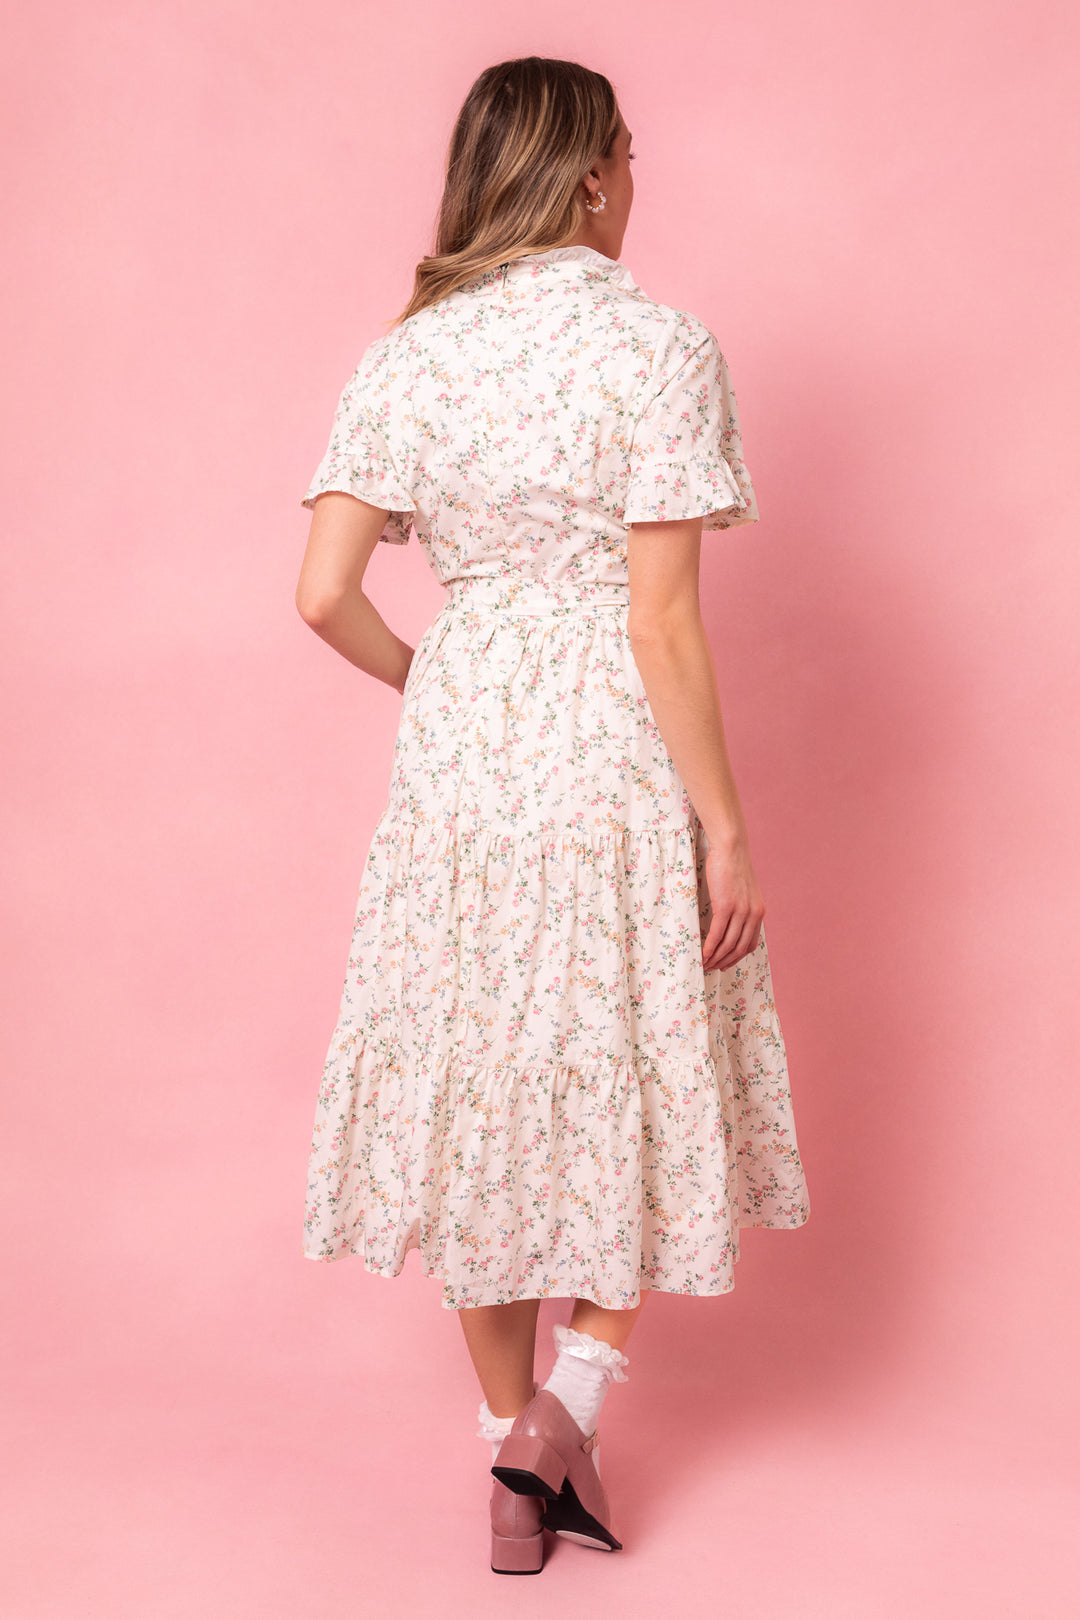 Sutton Dress Made With Liberty Fabric - FINAL SALE